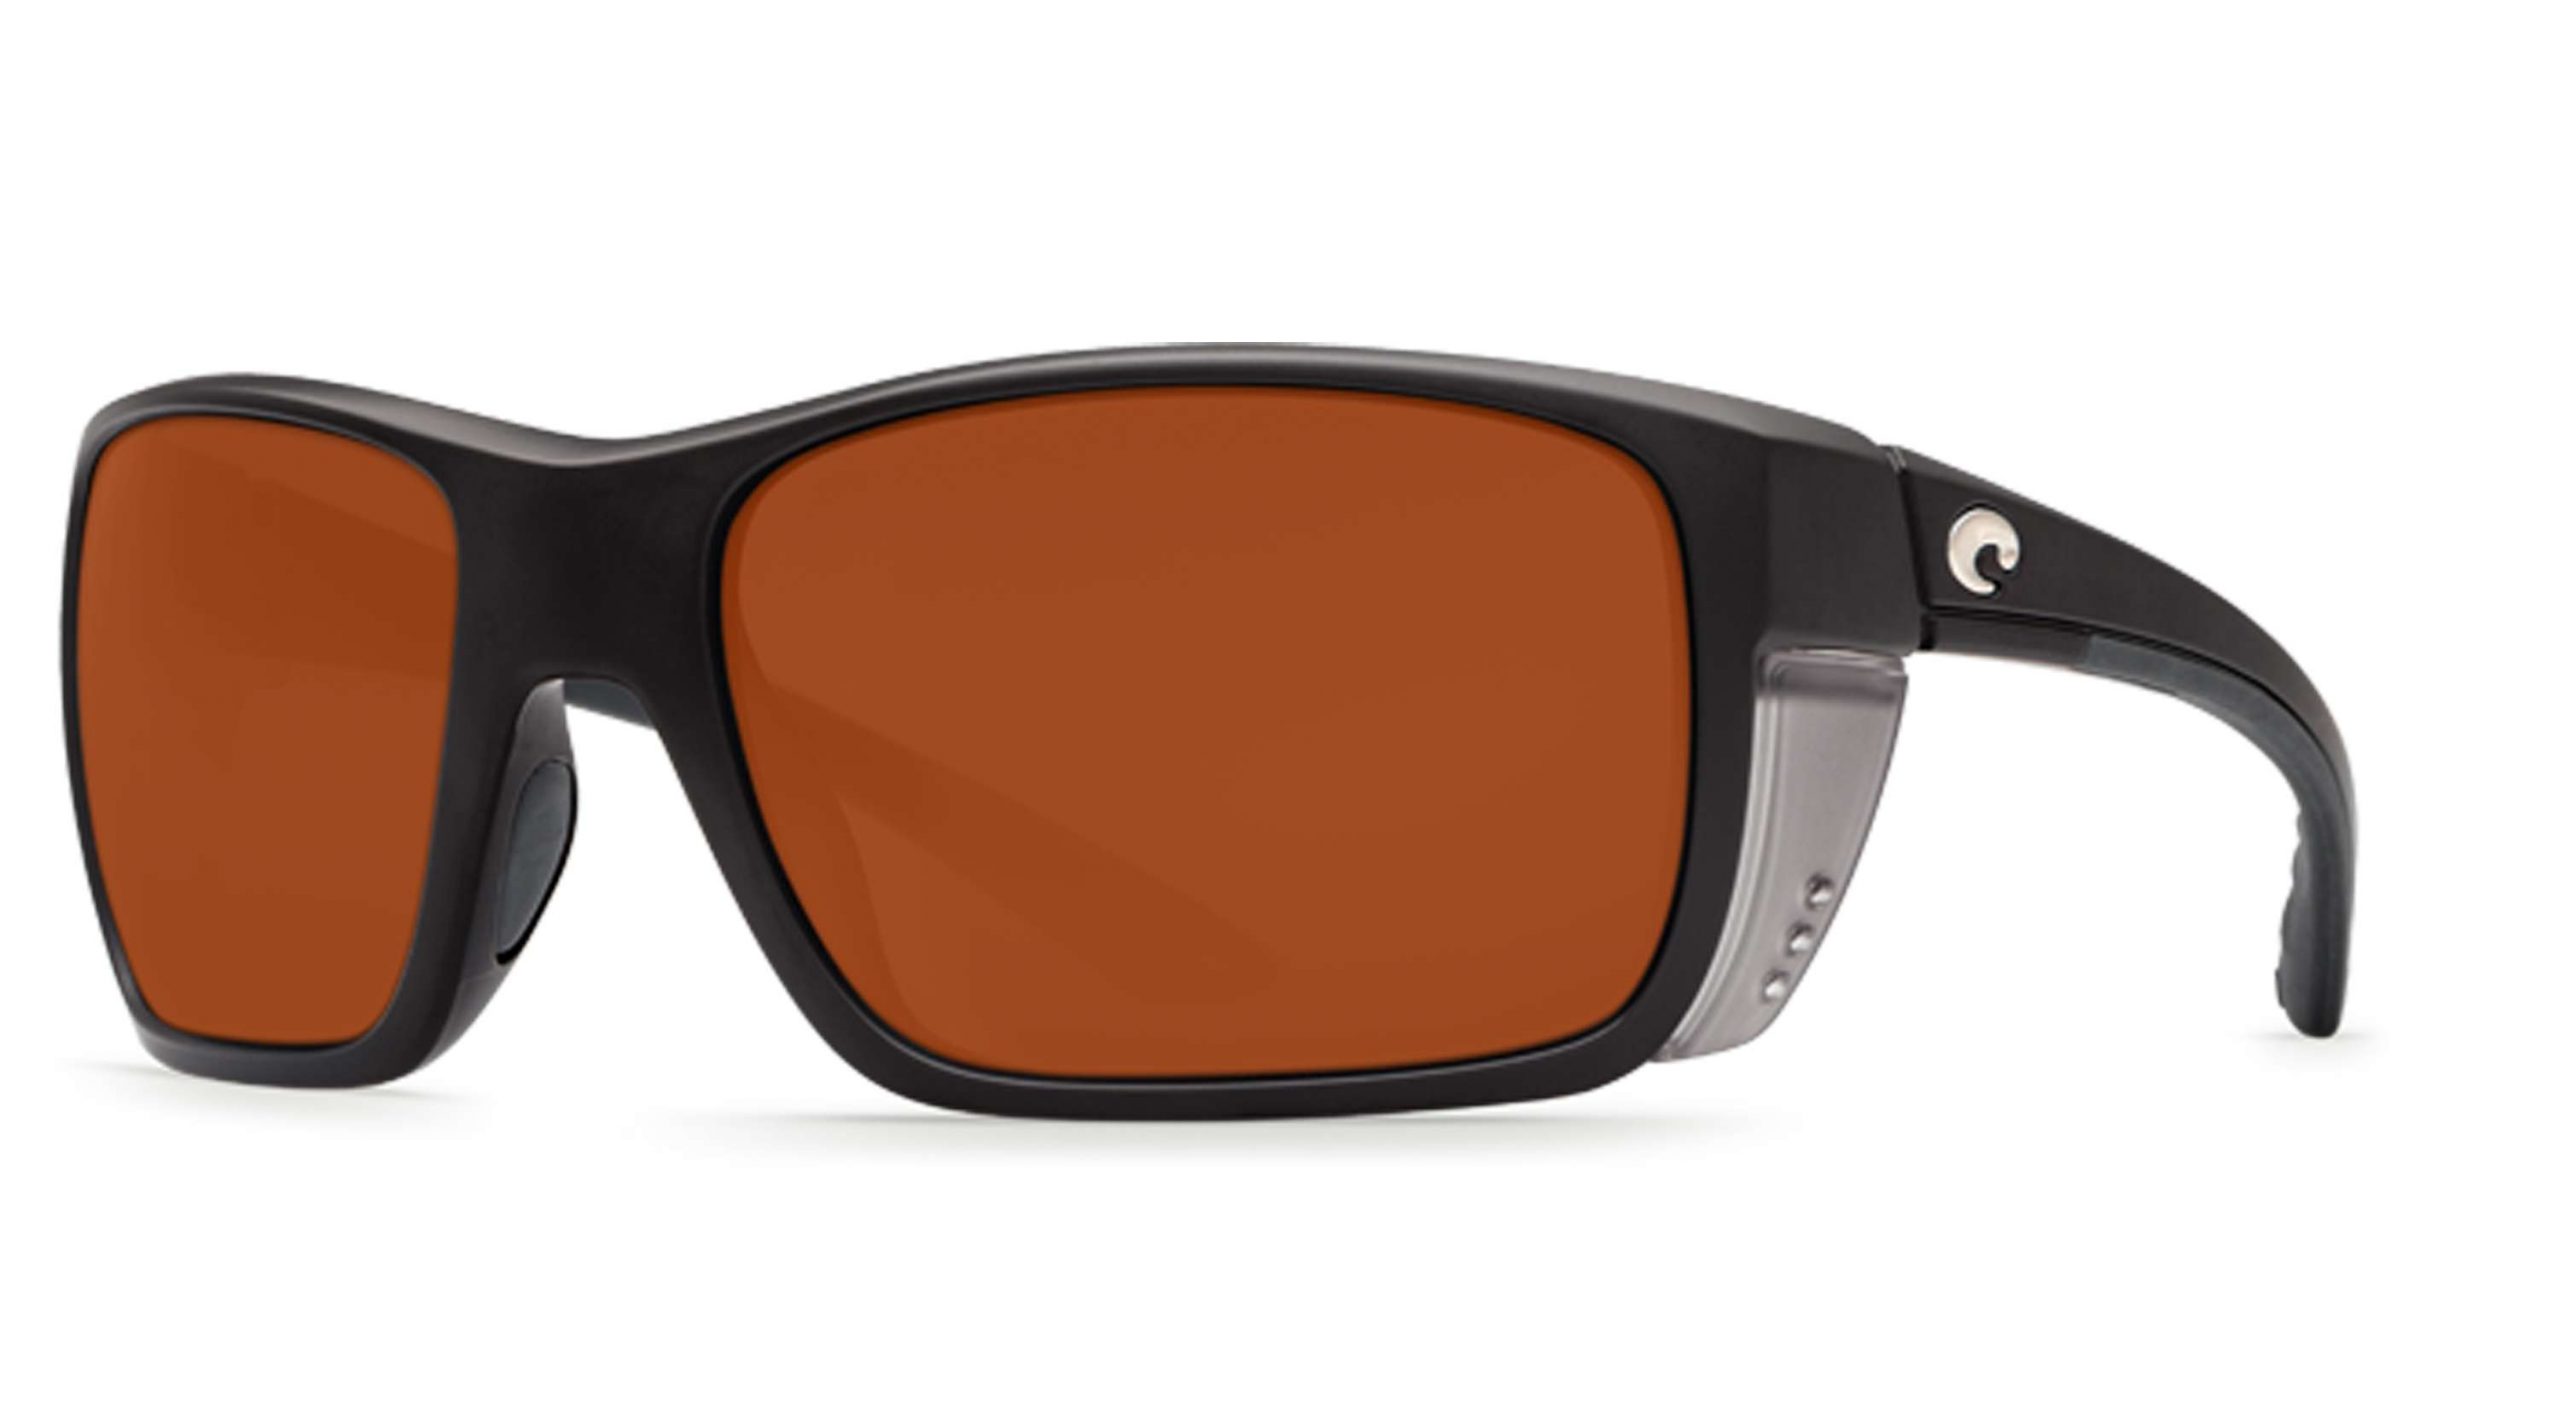 <b>Costa</b><br>	Rooster<br>				Costaâs Rooster models are large-fit sunglasses that include built-in side shields to block incoming glare, vents to alleviate lens fogging and open slots for a retainer cord. The frames are built of nearly indestructible co-injected molded nylon with sturdy integral hinge technology. The hypoallergenic rubberized interior lining and nose pads keep the sunglasses comfortably in place no matter how harsh the conditions. Rooster frame color options include blackout, tortoise, matte black and white.